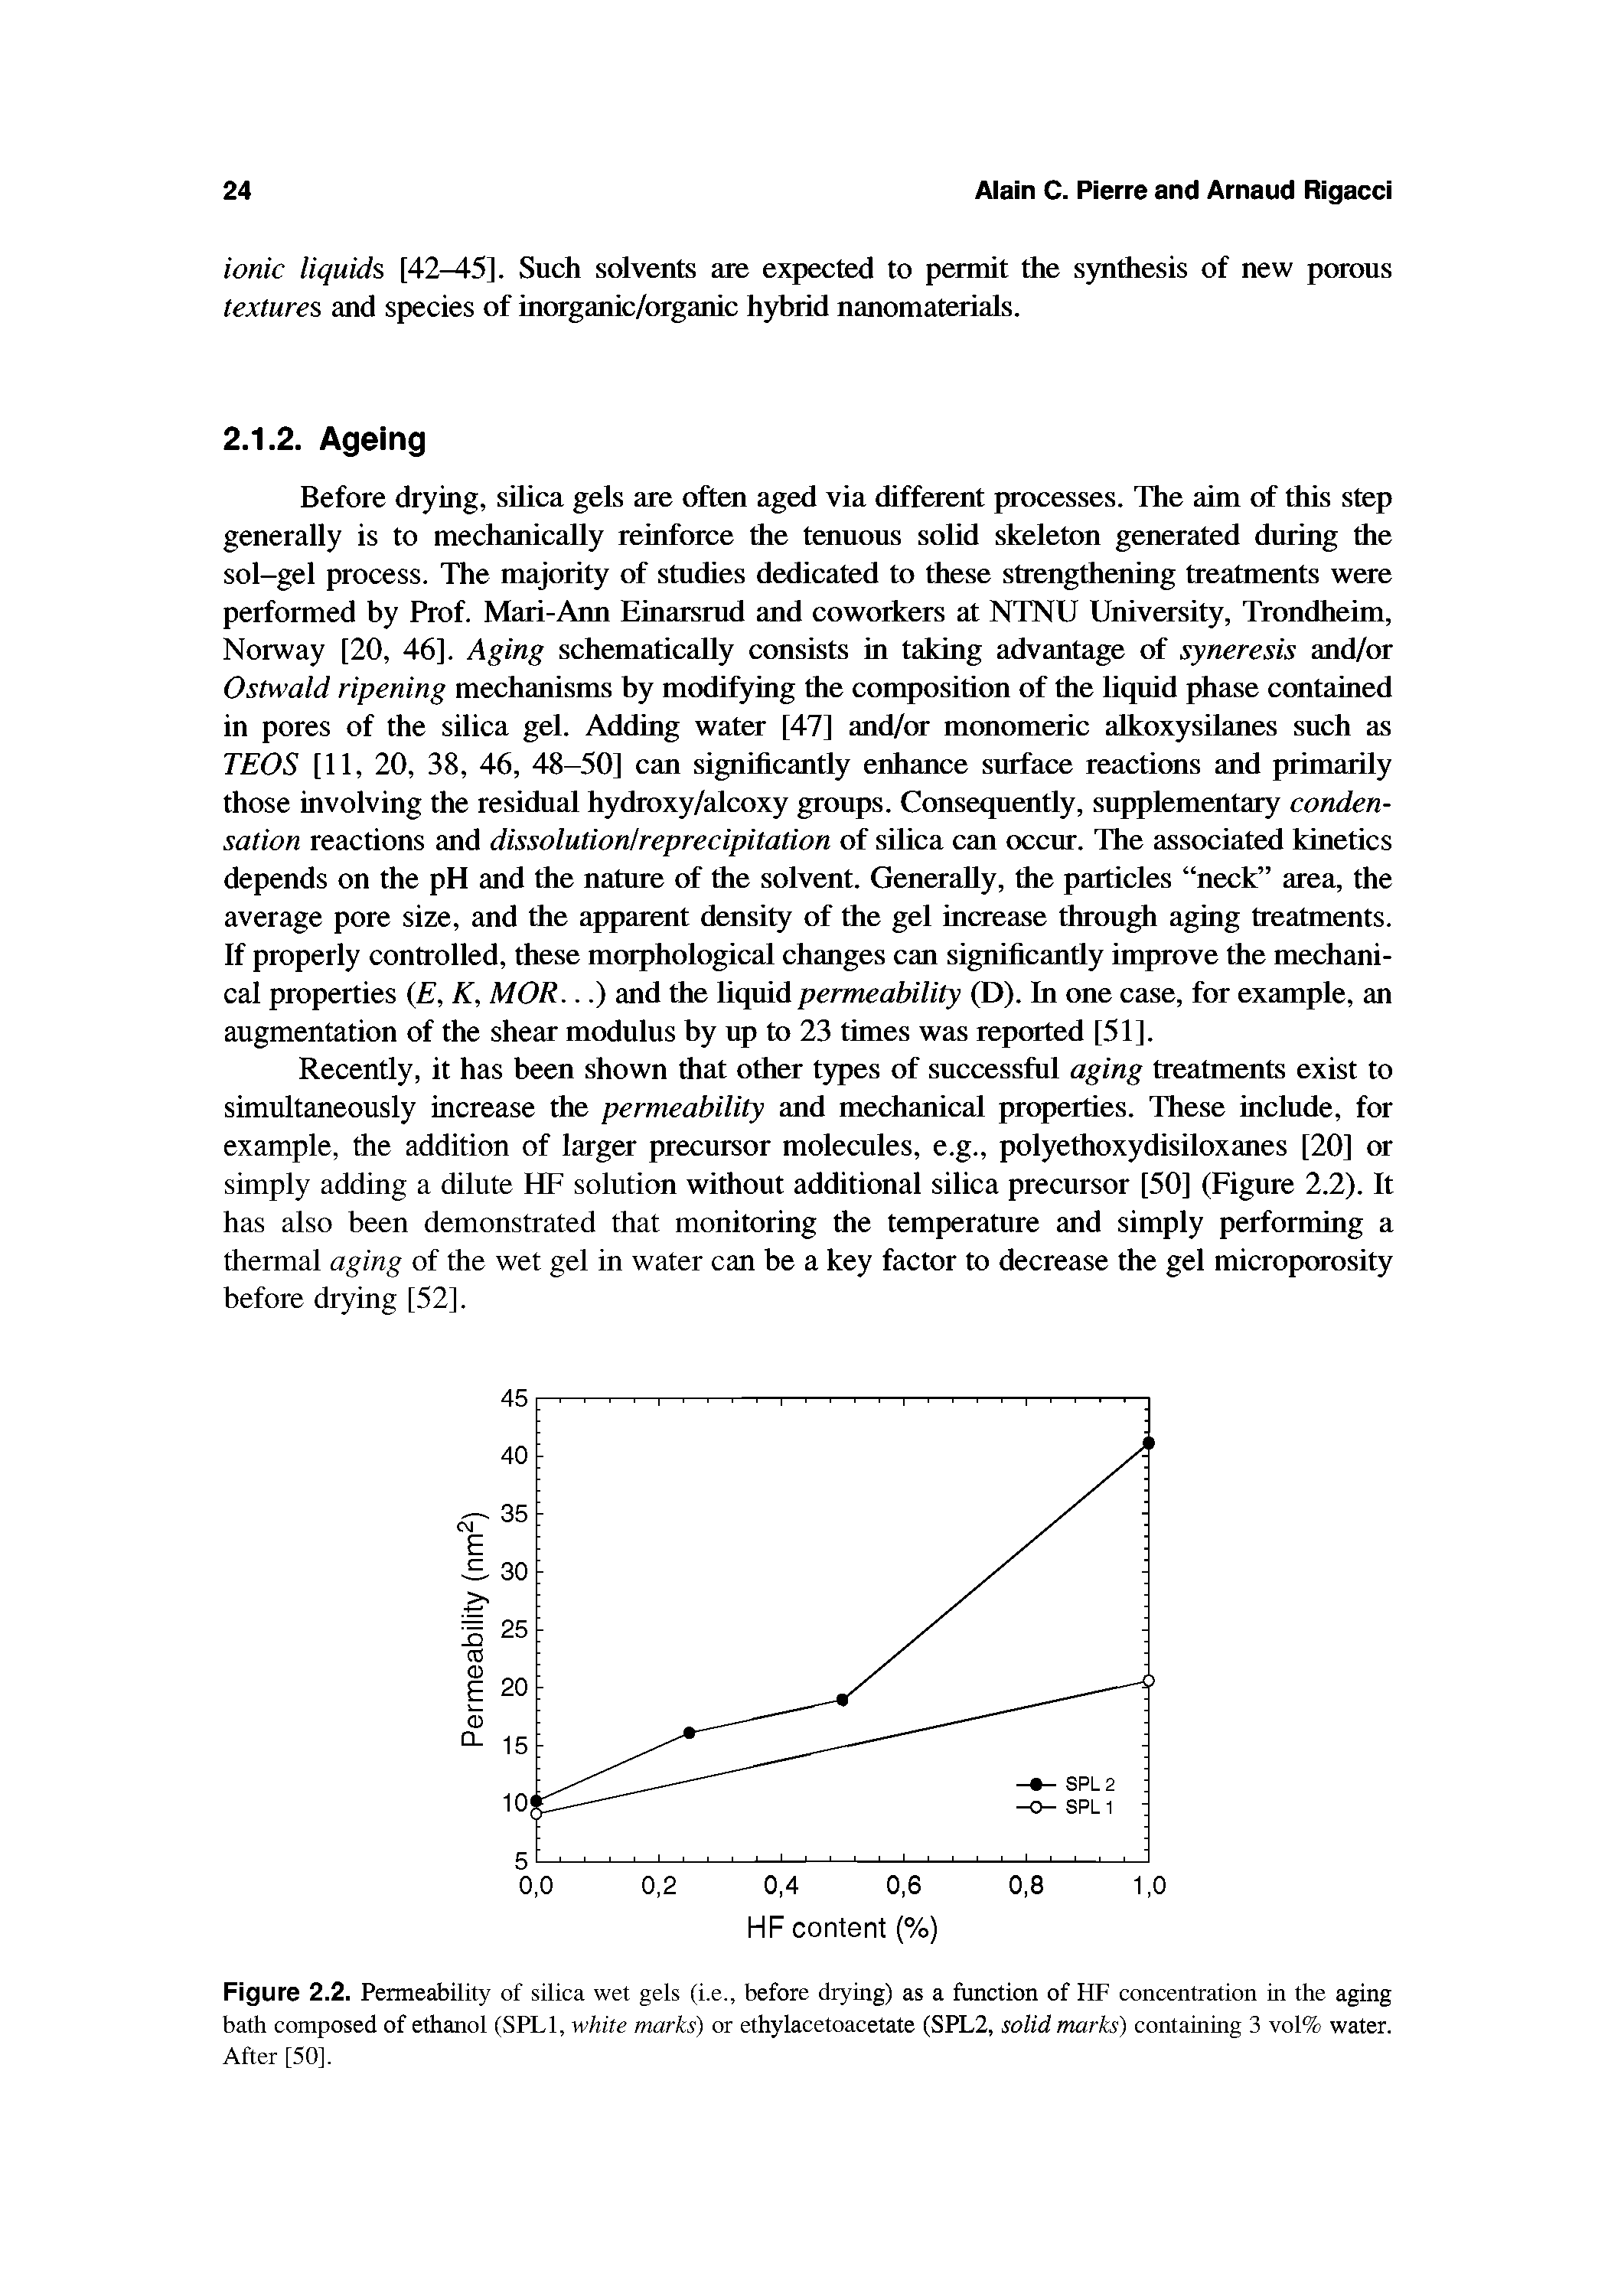 Figure 2.2. Penneability of silica wet gels (i.e., before drying) as a function of HF concentration in the aging bath composed of ethanol (SPLl, white marks) or ethylacetoacetate (SPL2, solid marks) containing 3 vol% water. After [50],...